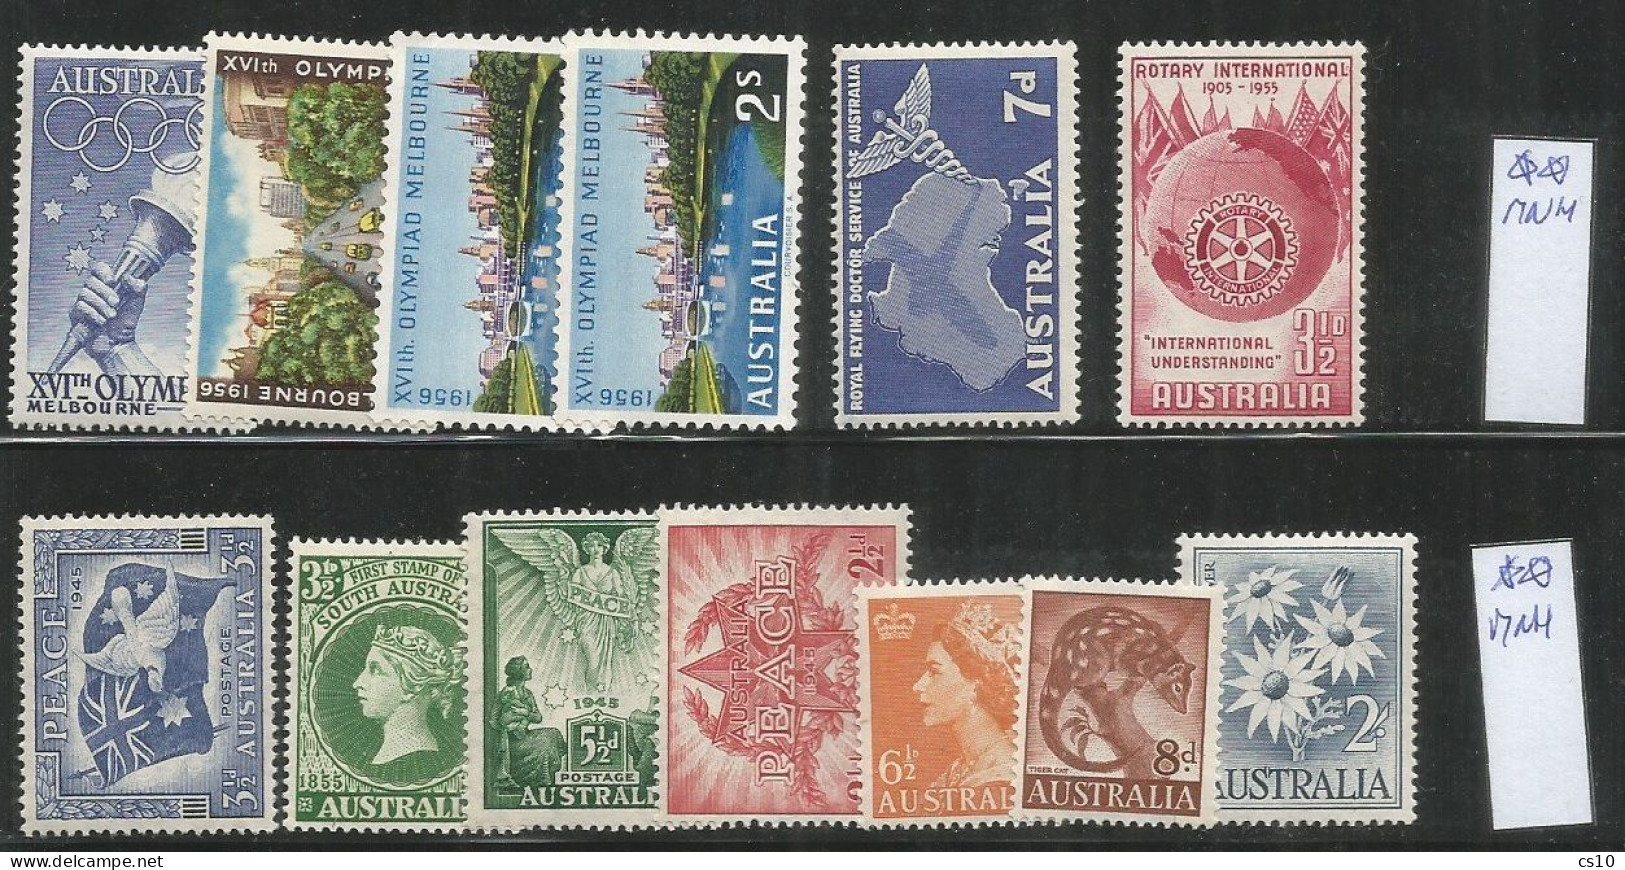 OLD Australia & States KG5 Head Kangaroos Study lot # 800+ pcs, on-piece Perfins OS P.Due Fiscals + Unfranked 75 AUD